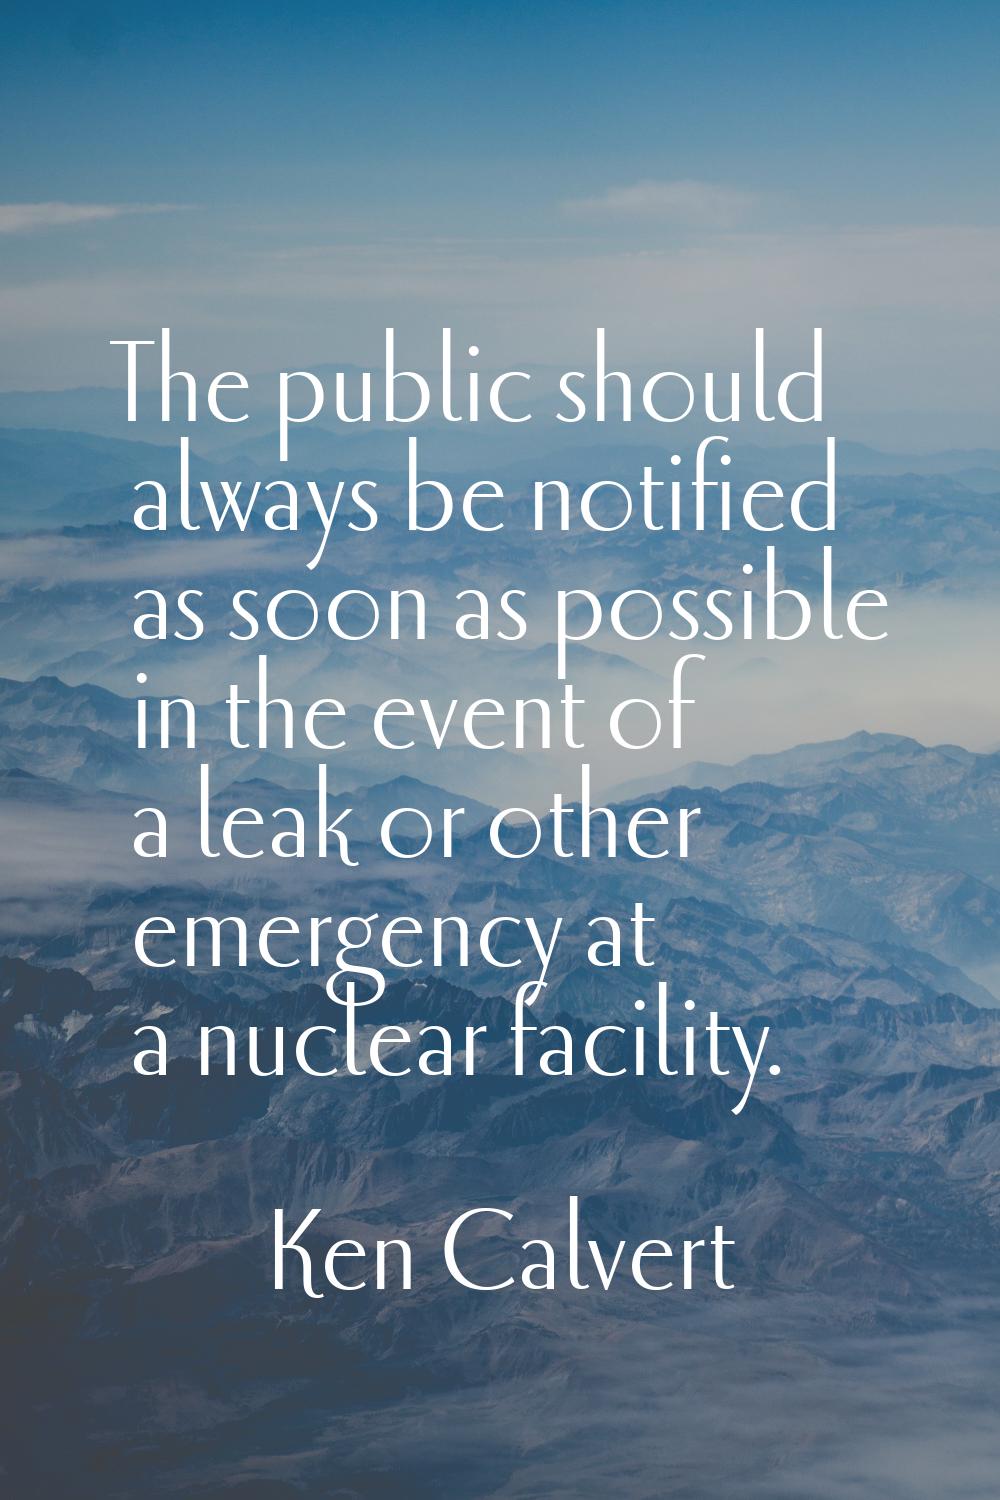 The public should always be notified as soon as possible in the event of a leak or other emergency 